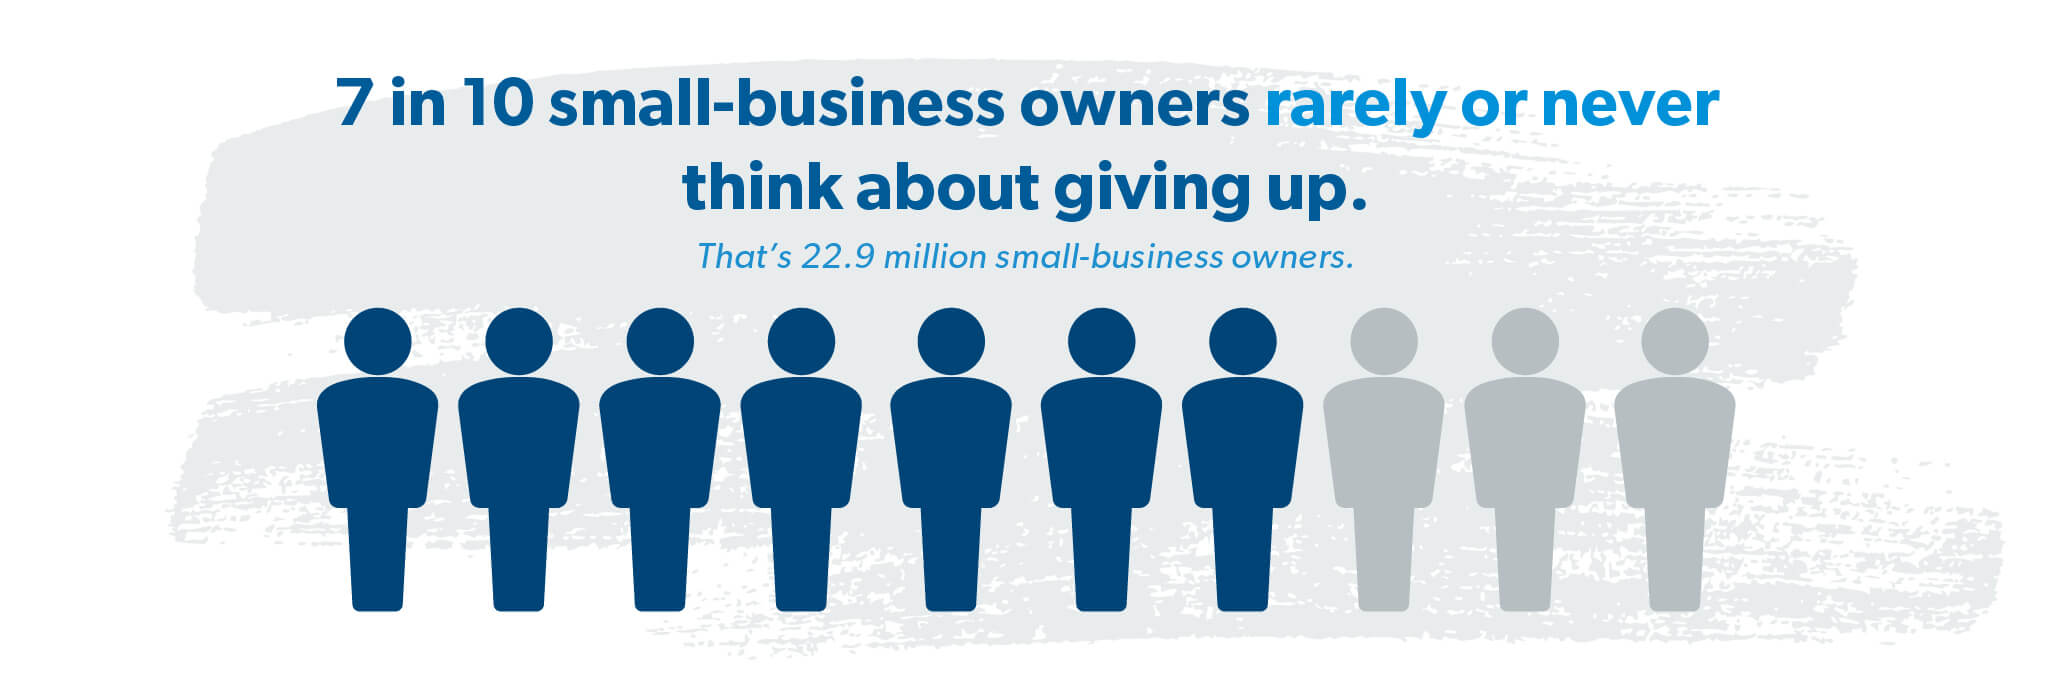 7 in 10 small-business owners rarely or never think about giving up